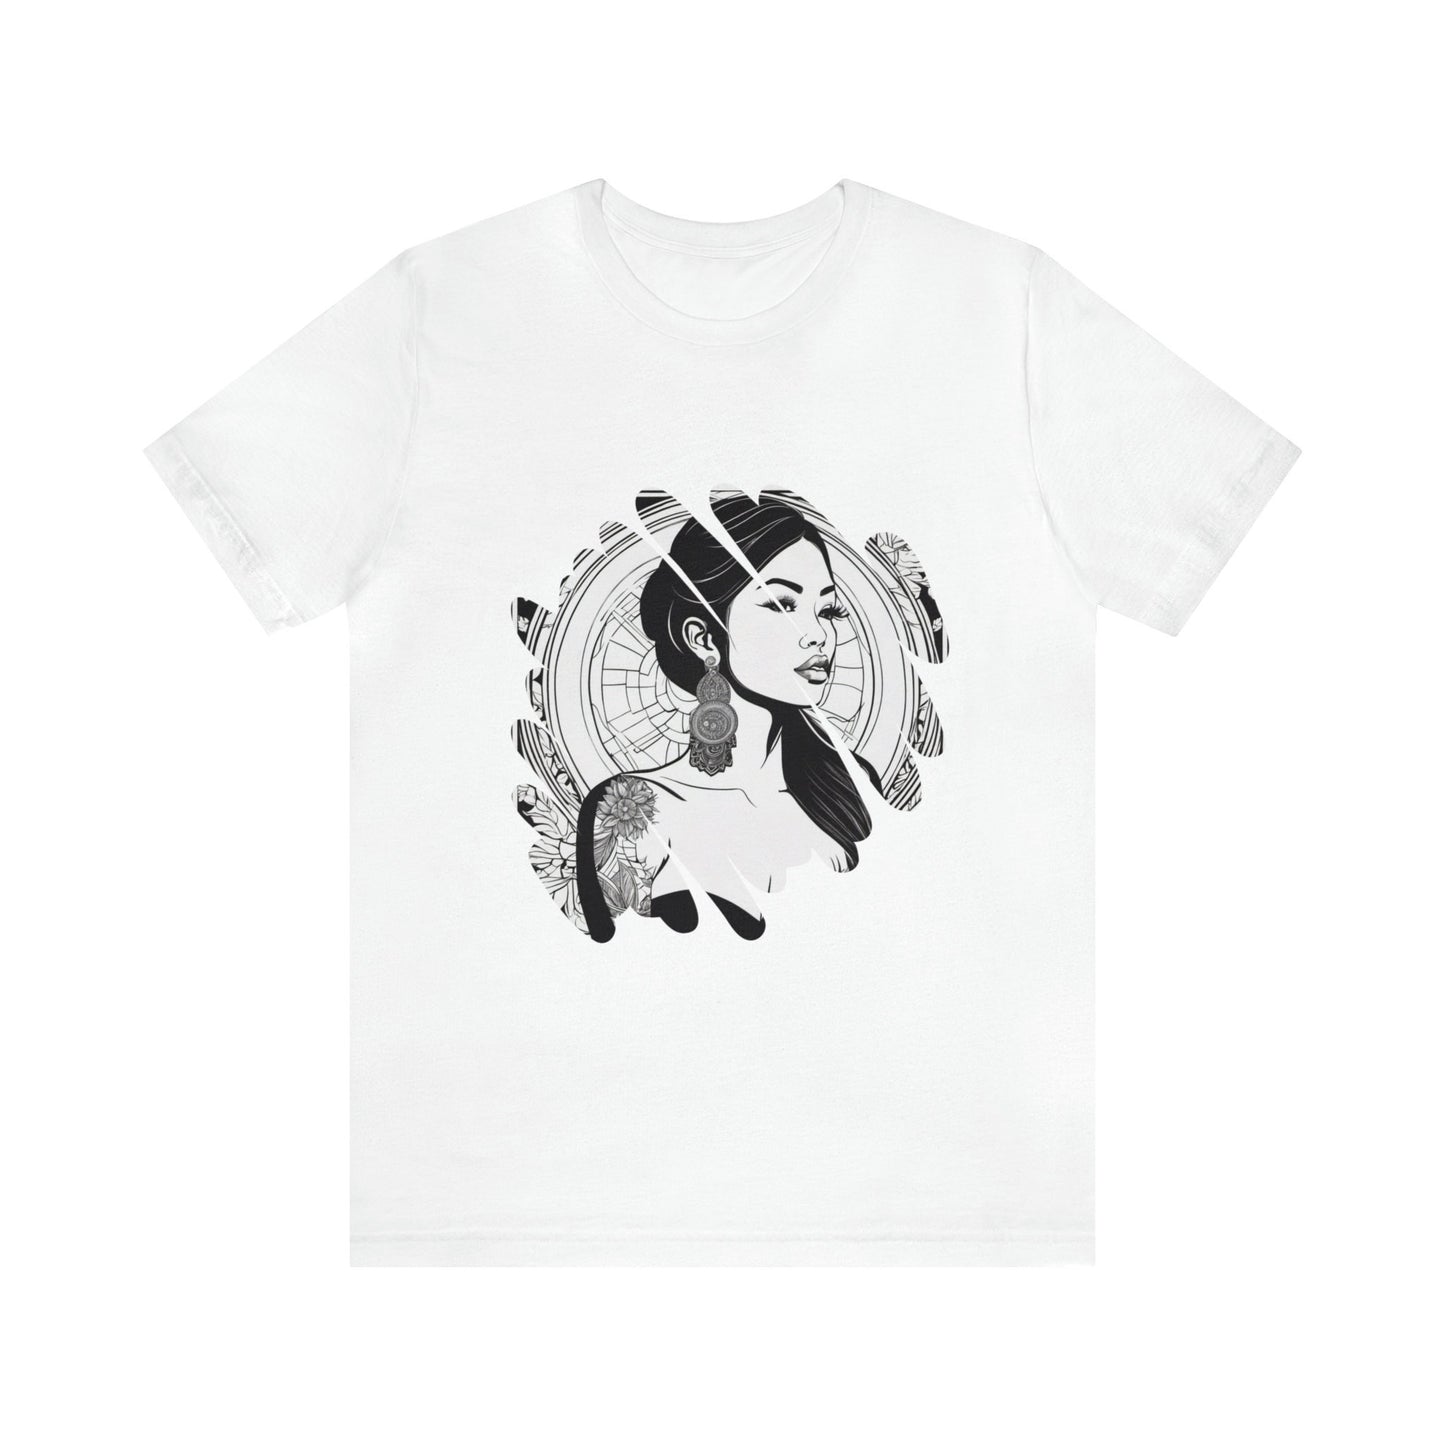 Melinda Tattoo Pin-Up Girl Short Sleeve Tee Perfect Gift for Men and Women